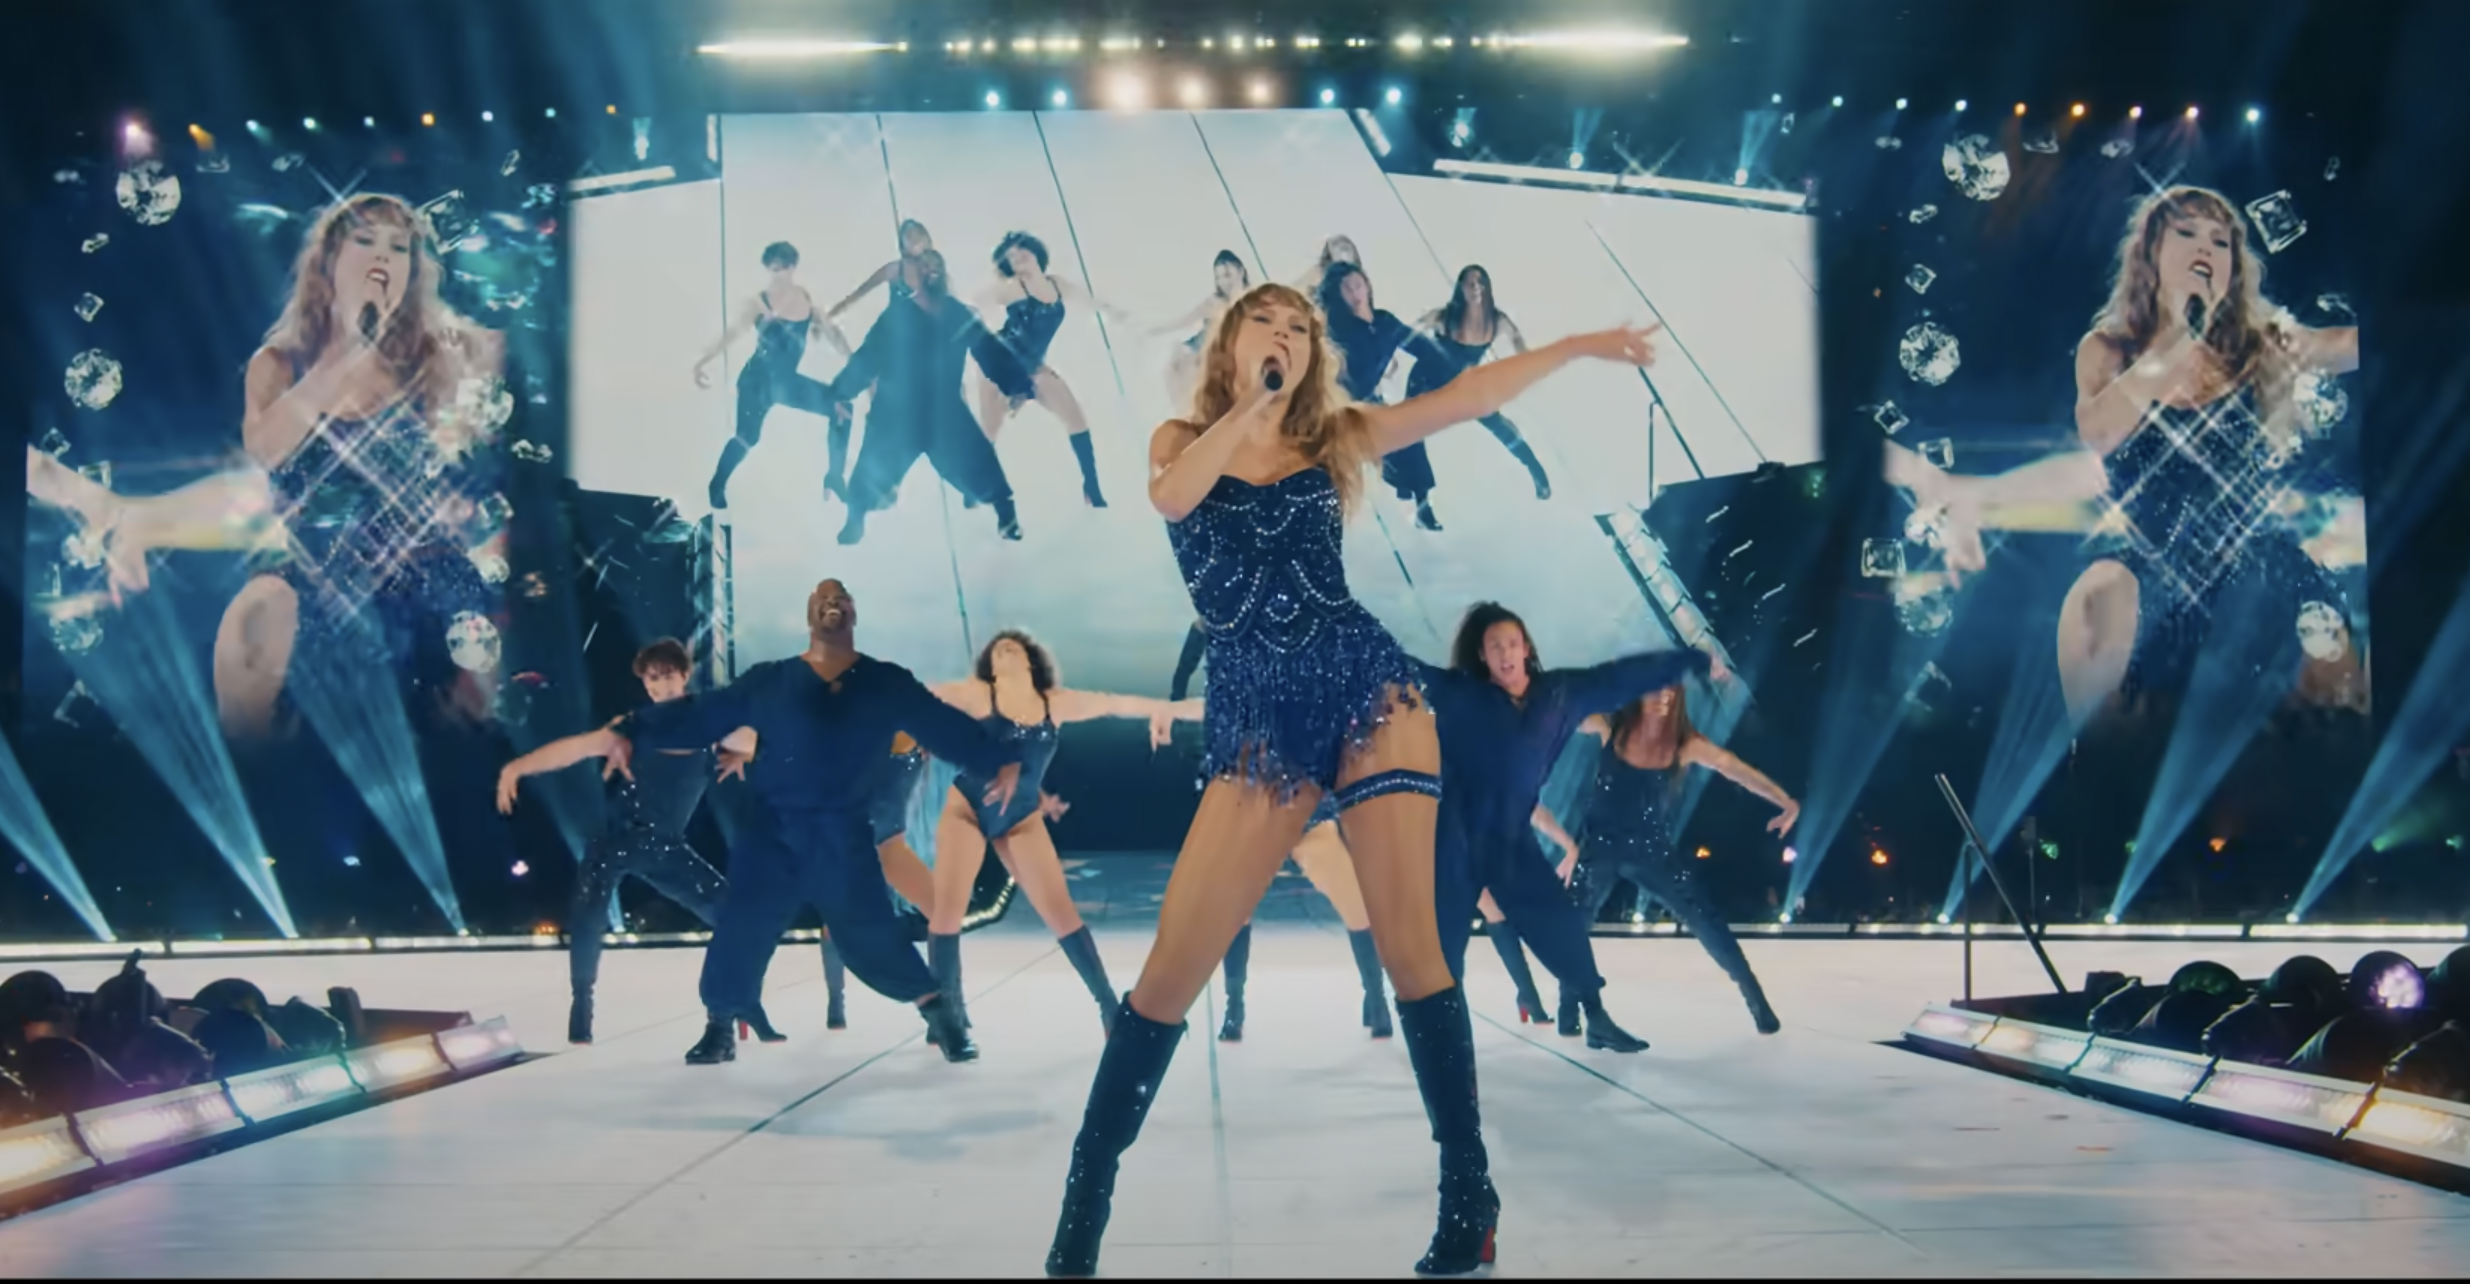 Taylor Swift Fans Outraged After Pic Of A Baby On Concert Floor Goes Viral